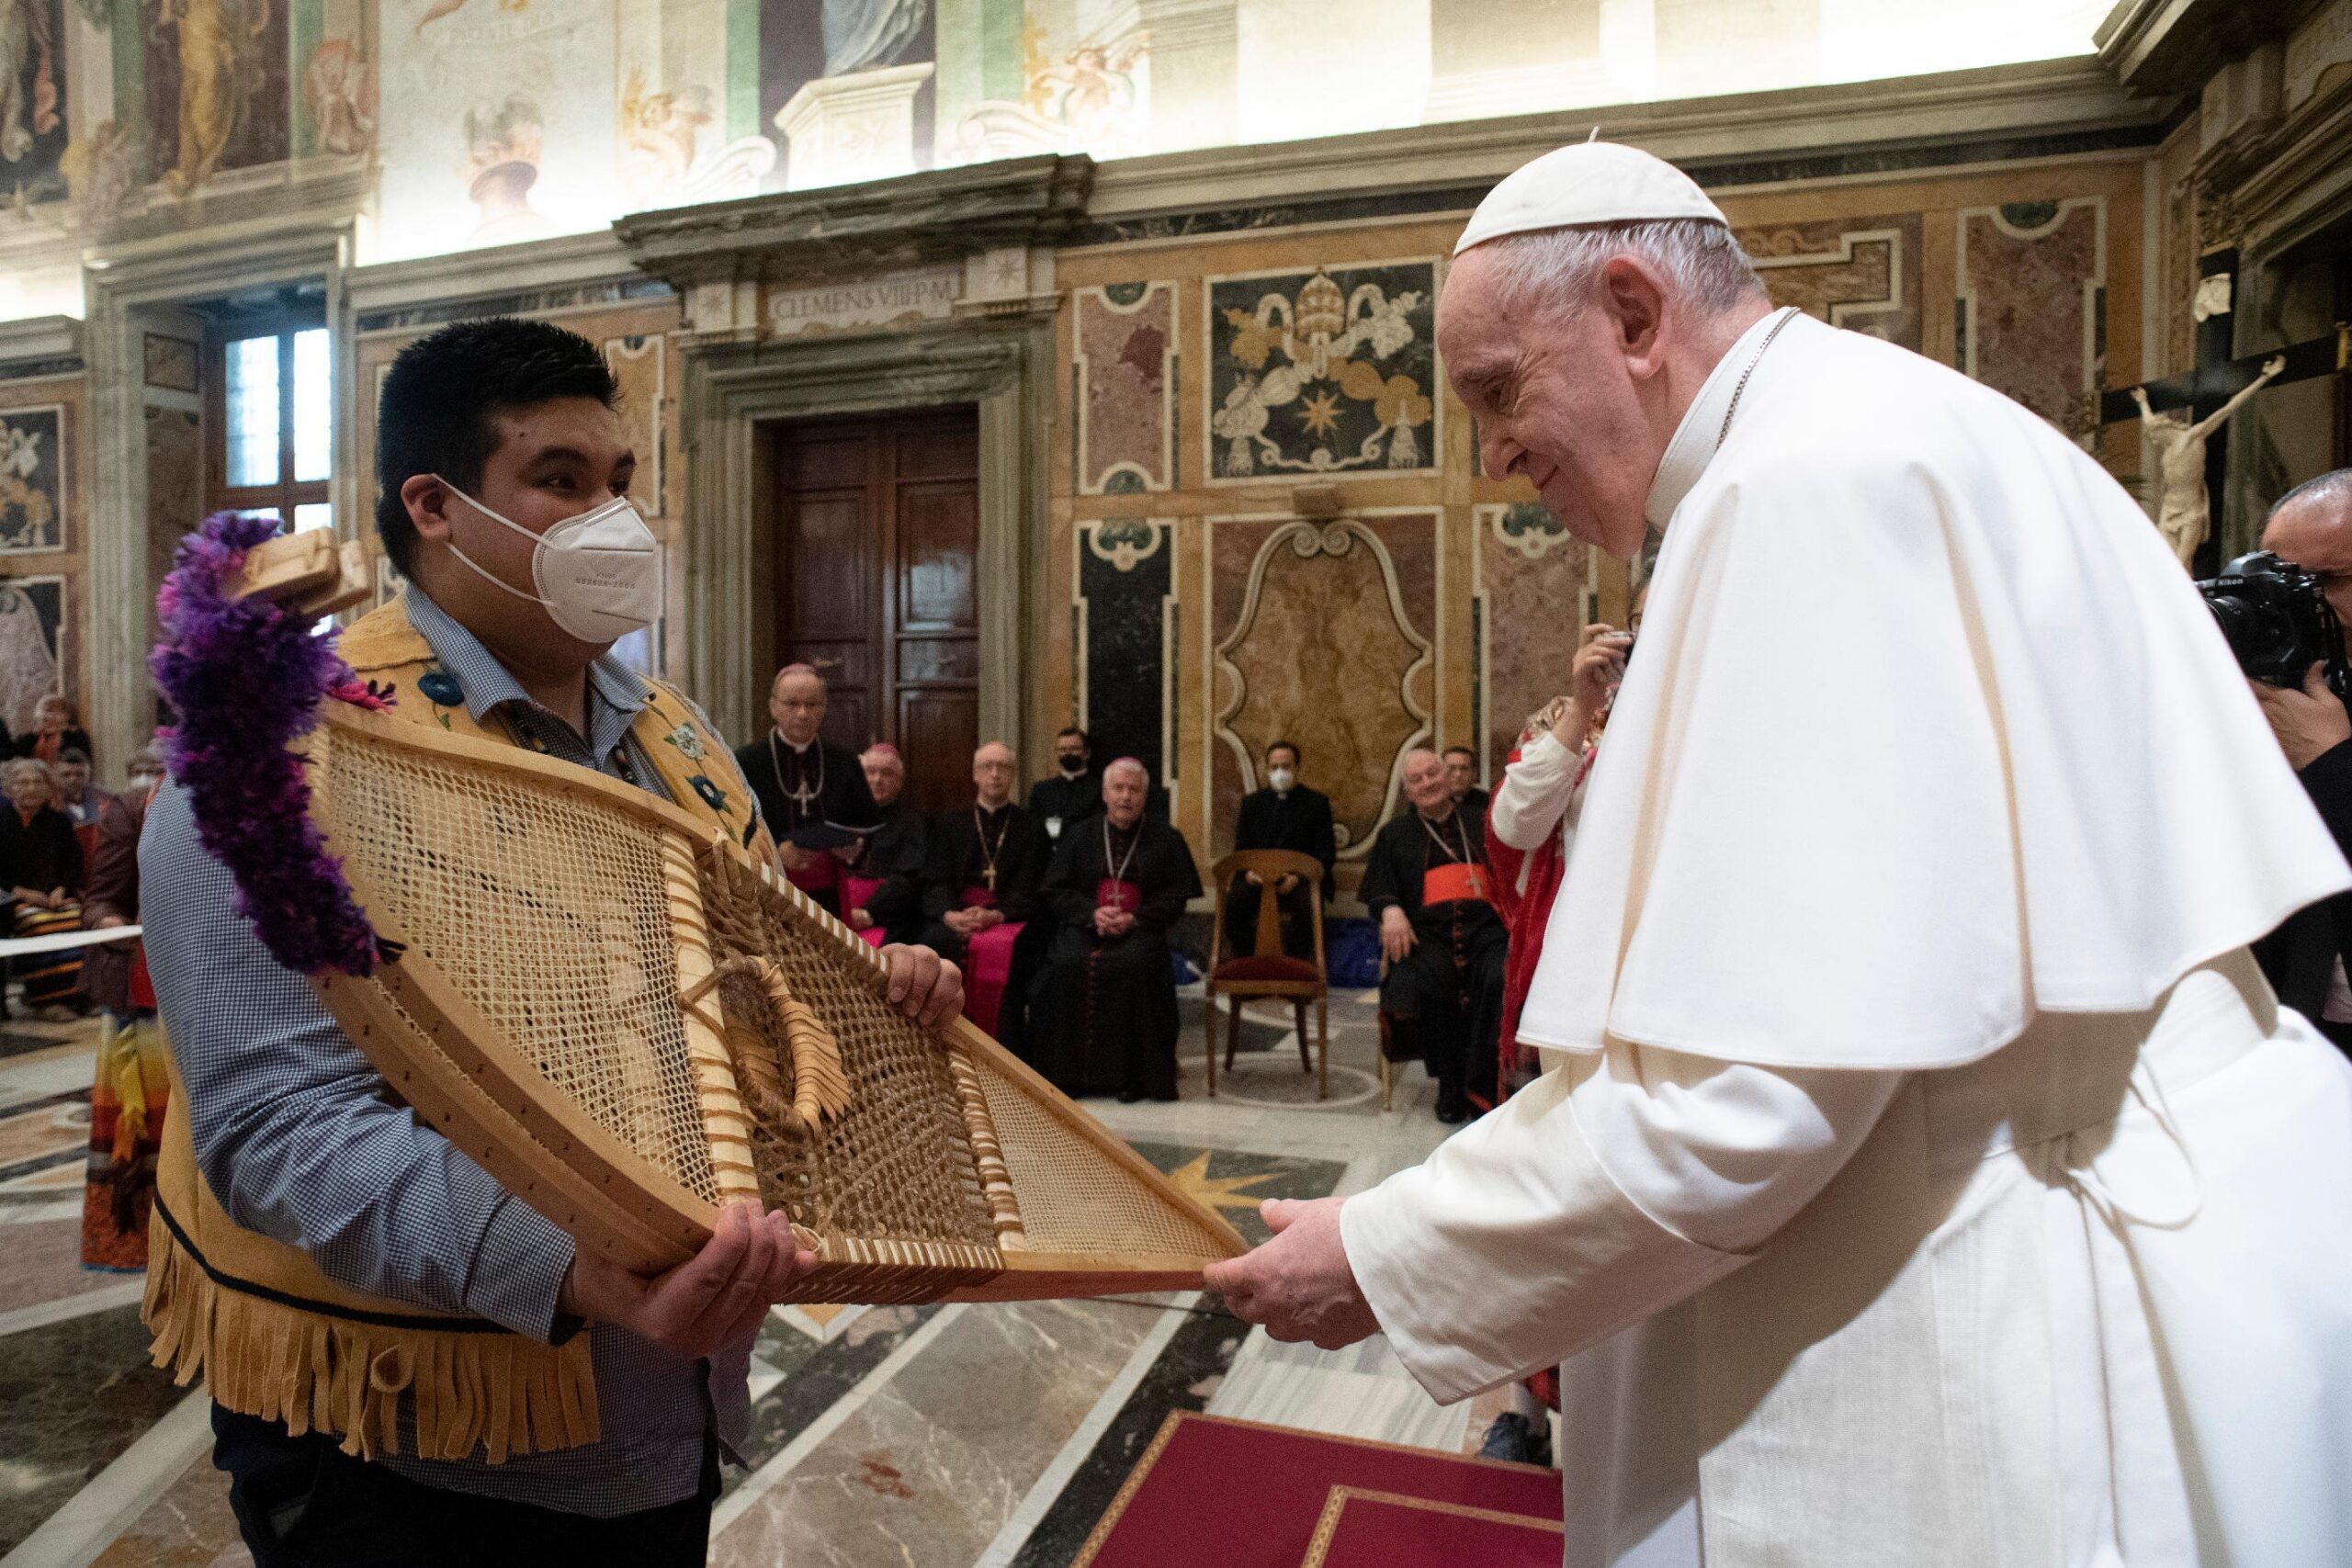 Pope Francis accepts snowshoes from Adrian Gunner, representing the Assembly of First Nations, during a meeting with Canadian Indigenous groups at the Vatican April 1, 2022. (CNS photo/Vatican Media)